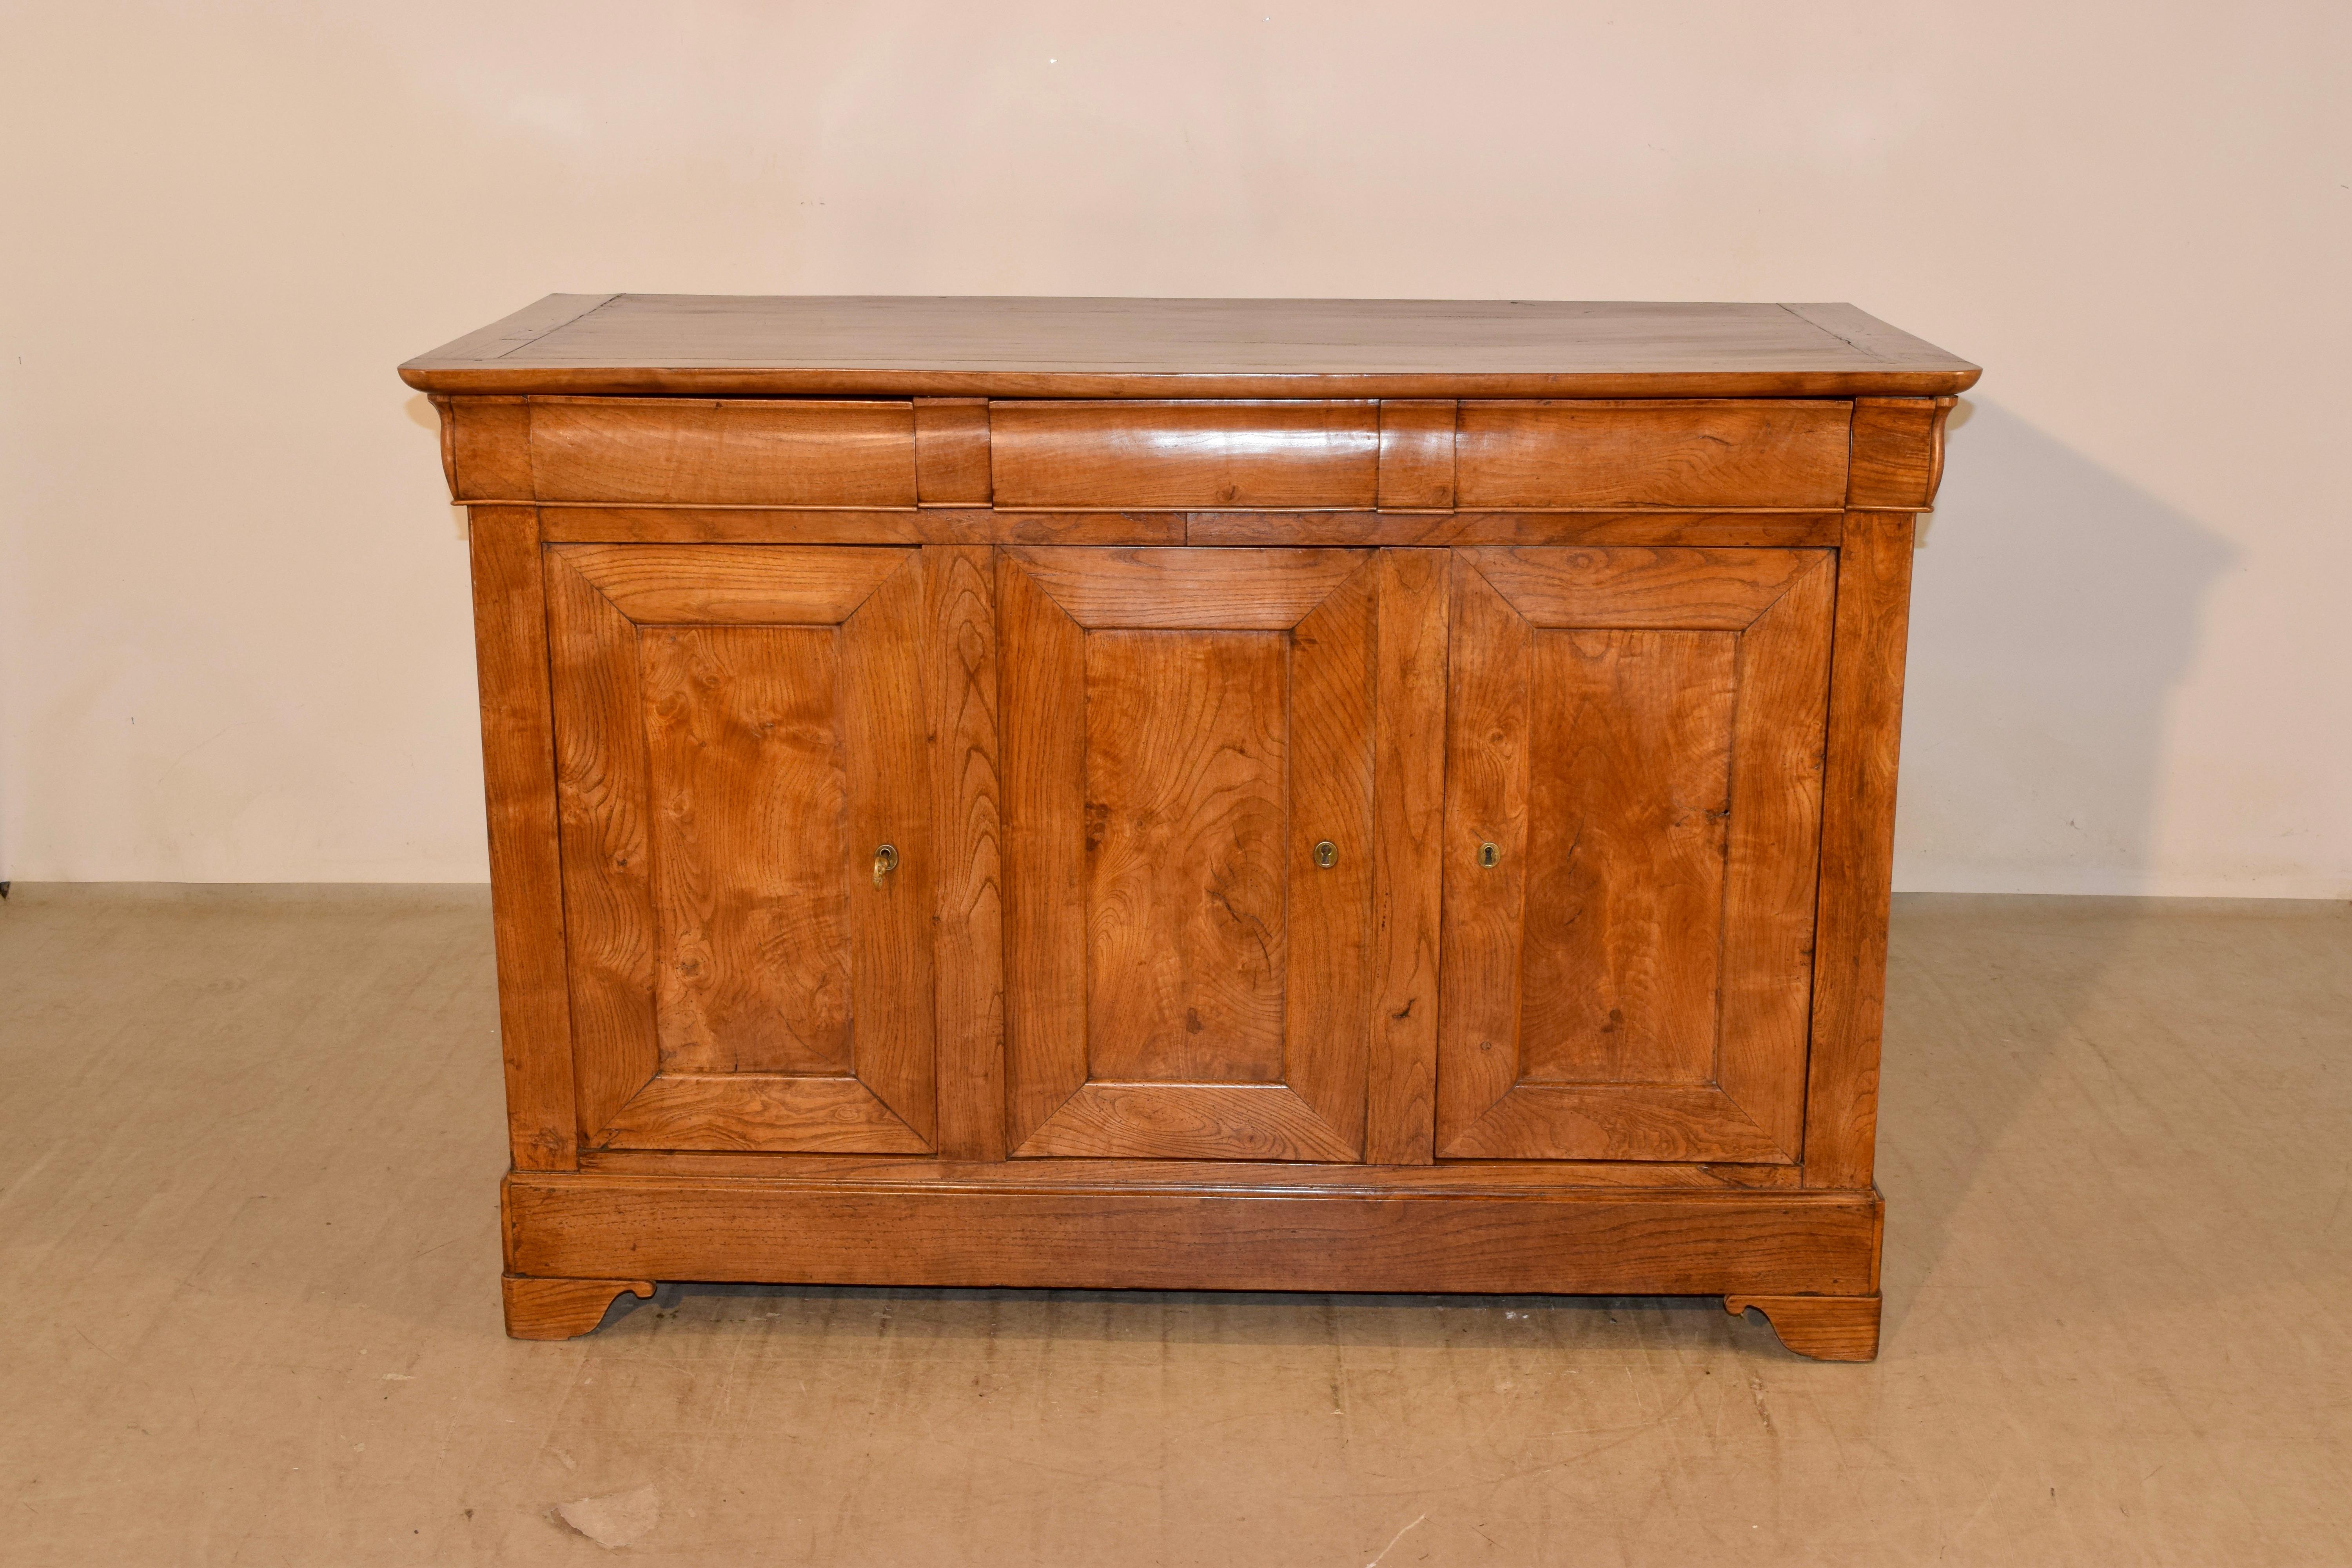 19th century elm enfilade from France with wonderful graining throughout the case. The top is made up of planks and has banded edges, following down to two drawers over three dpaneled doors, which open to reveal shelving. The sides are simple and